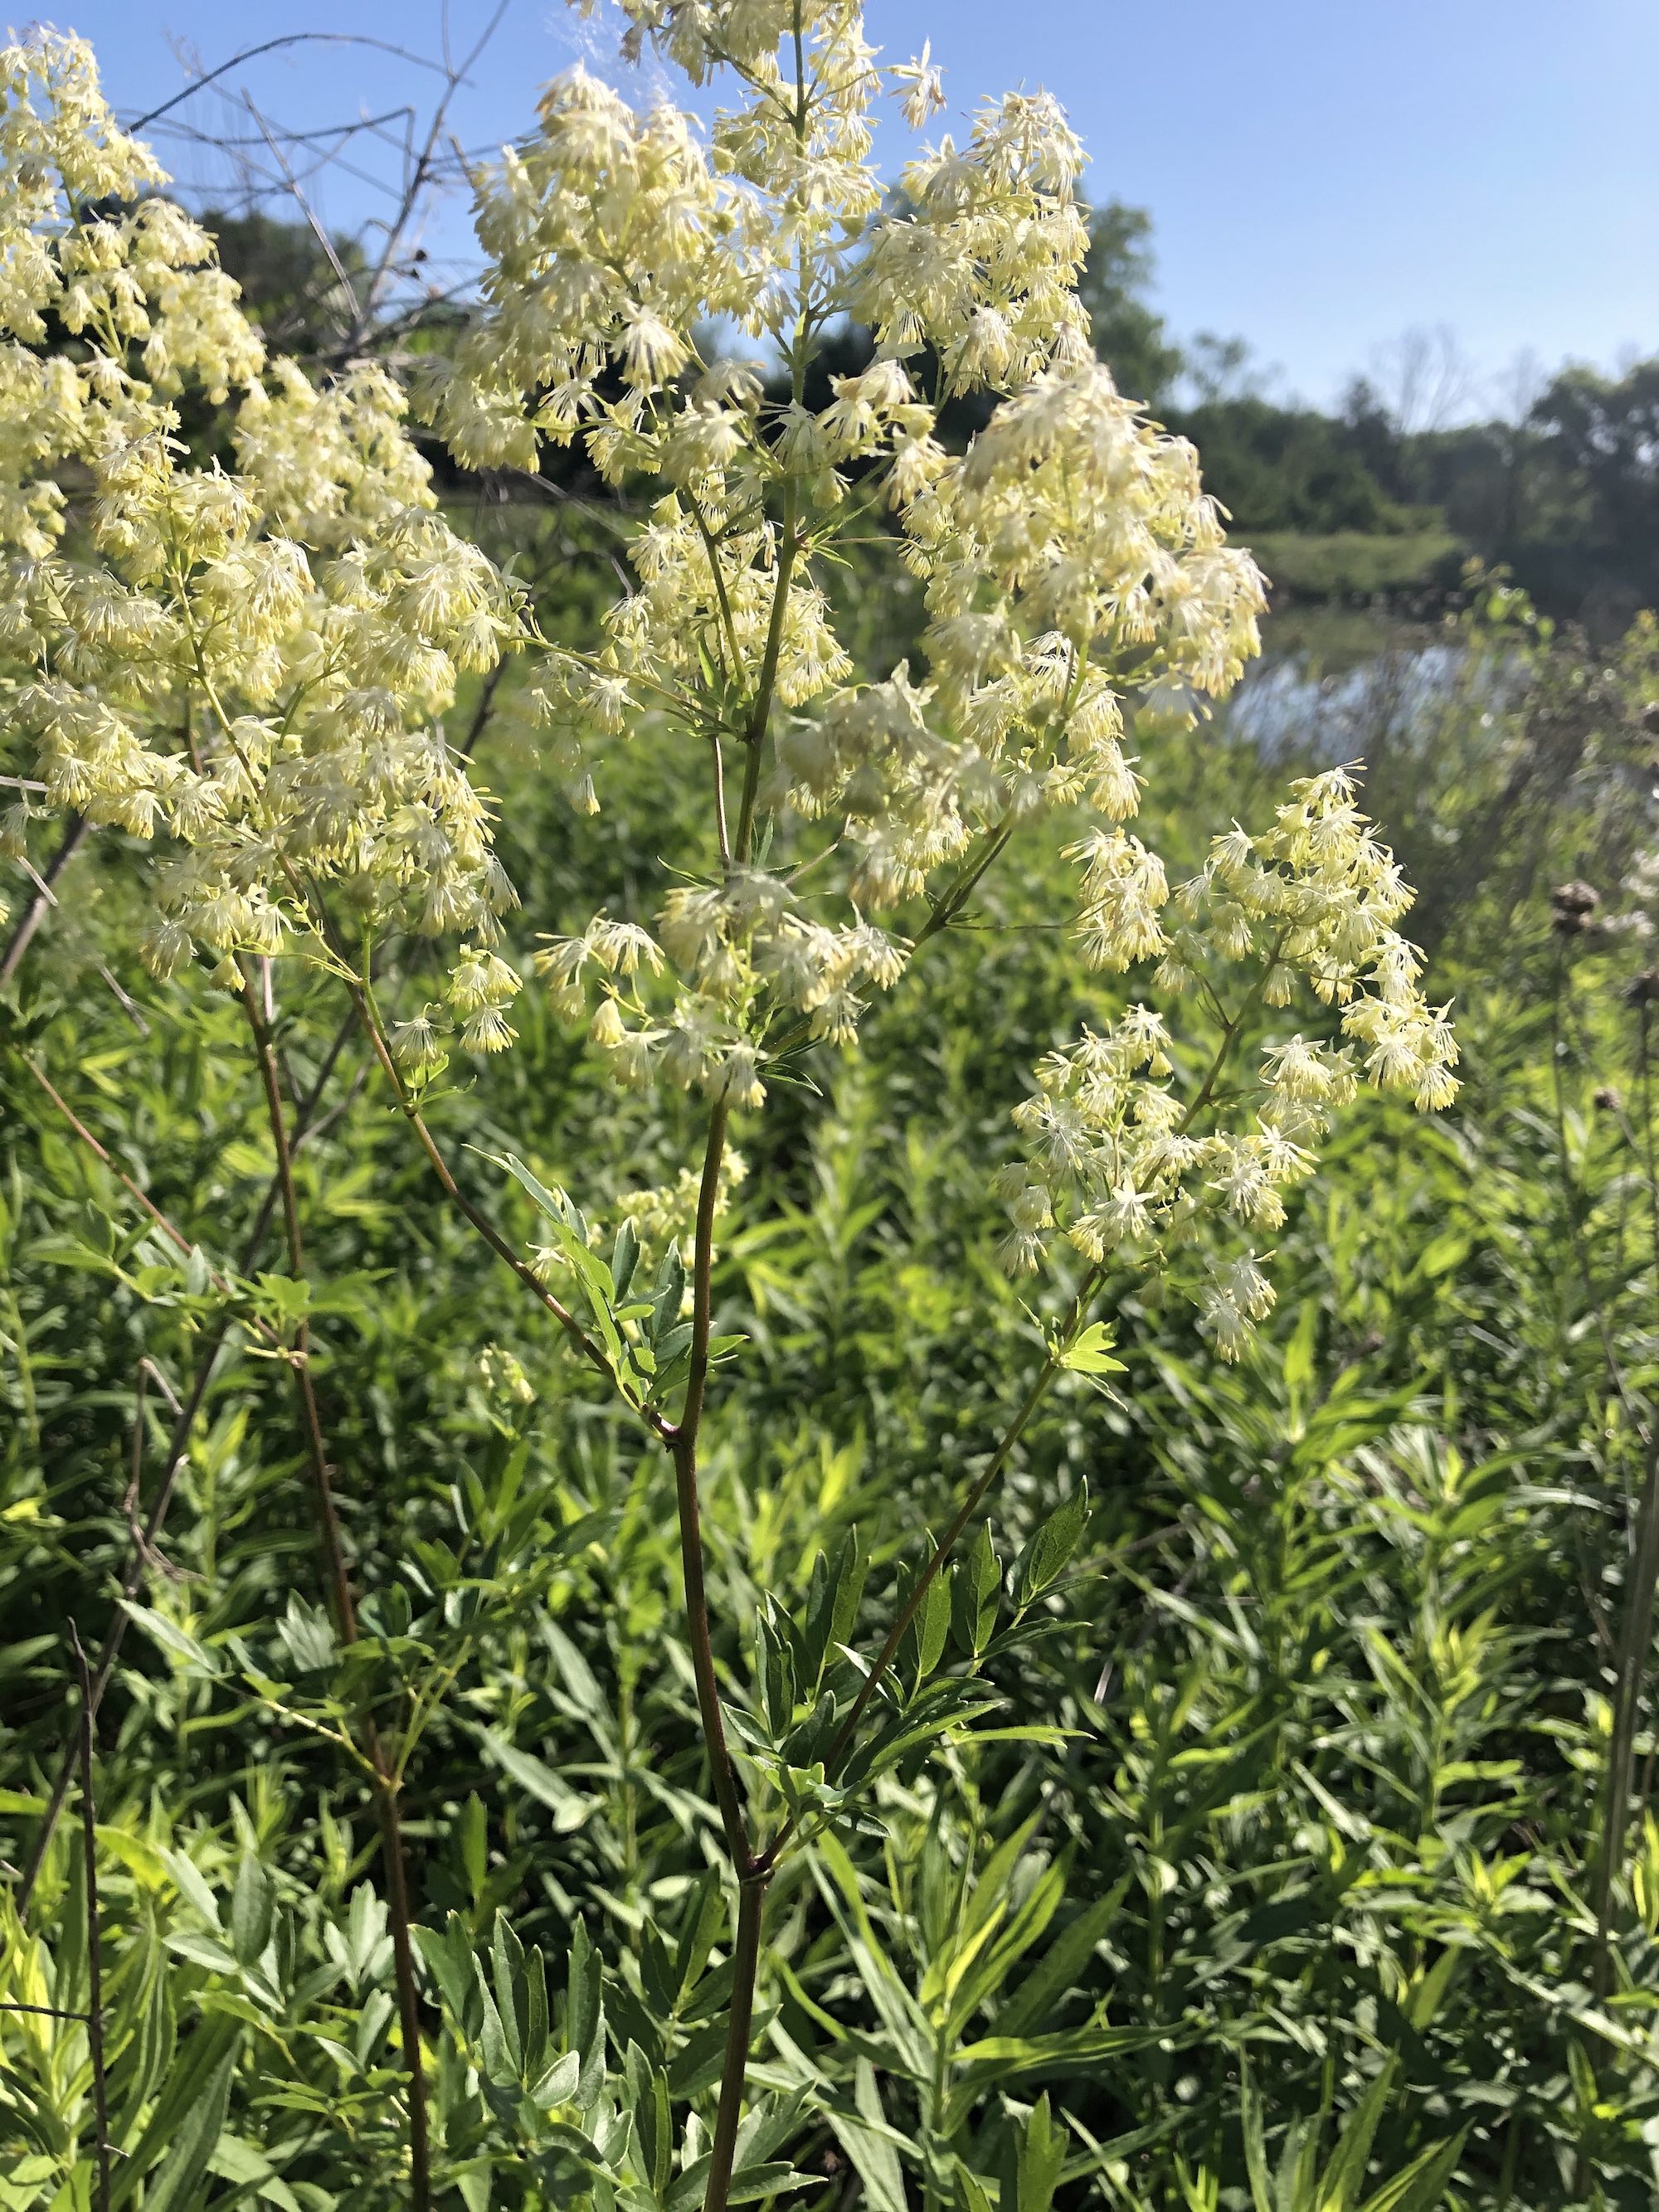 Tall Meadow-rue on shore of Retaining Pond on June 14, 2020.